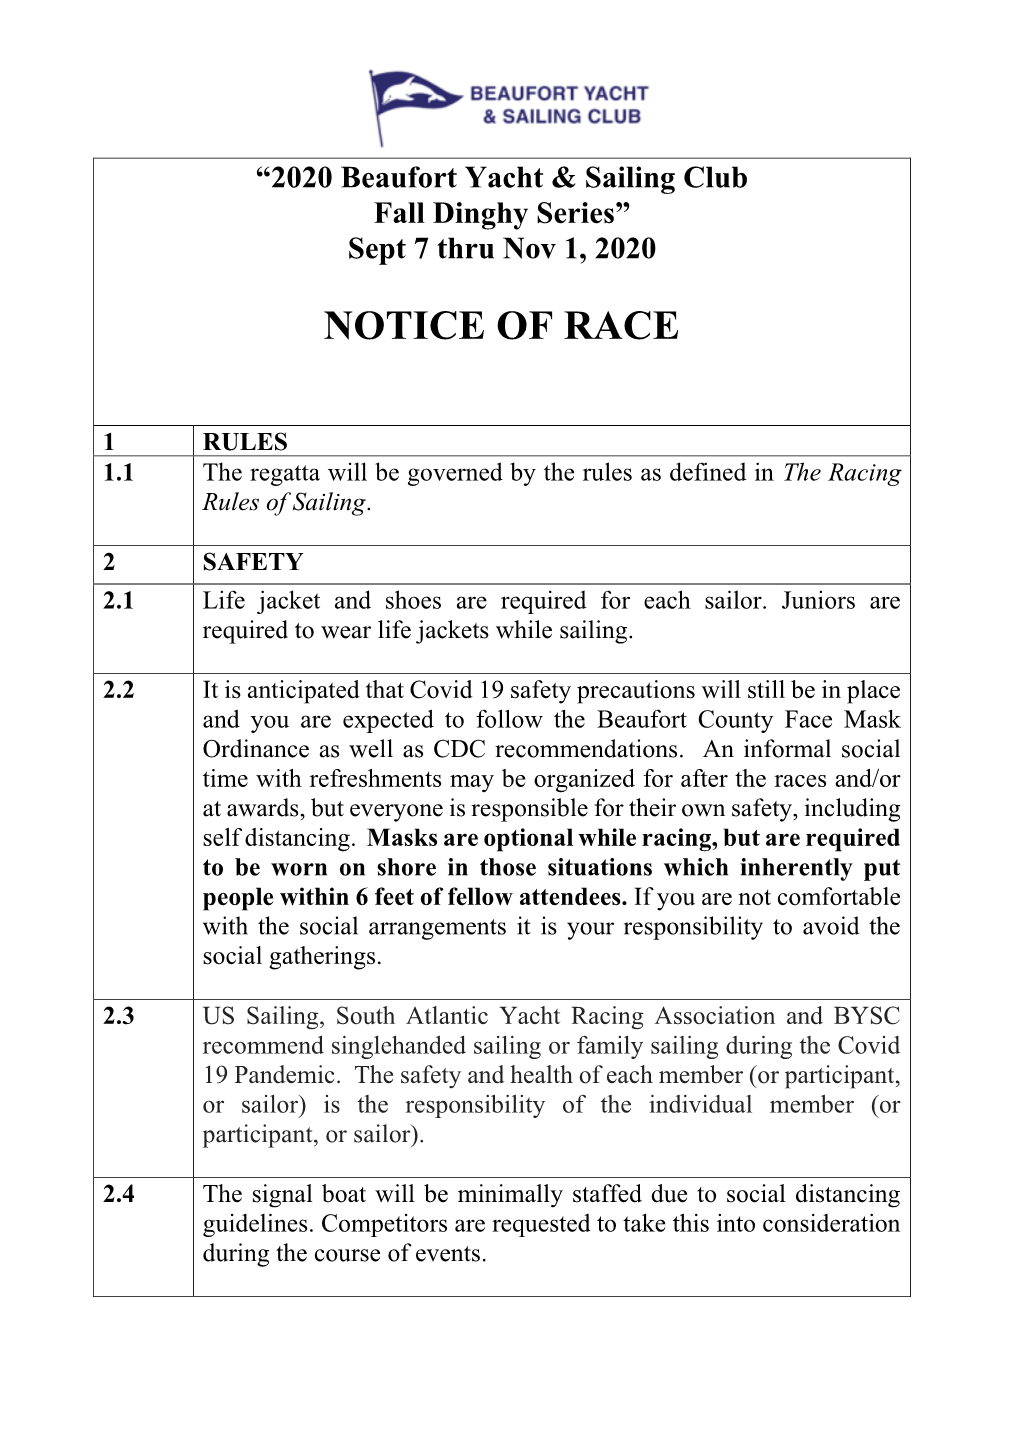 2020 Fall Dinghy Series Notice of Race